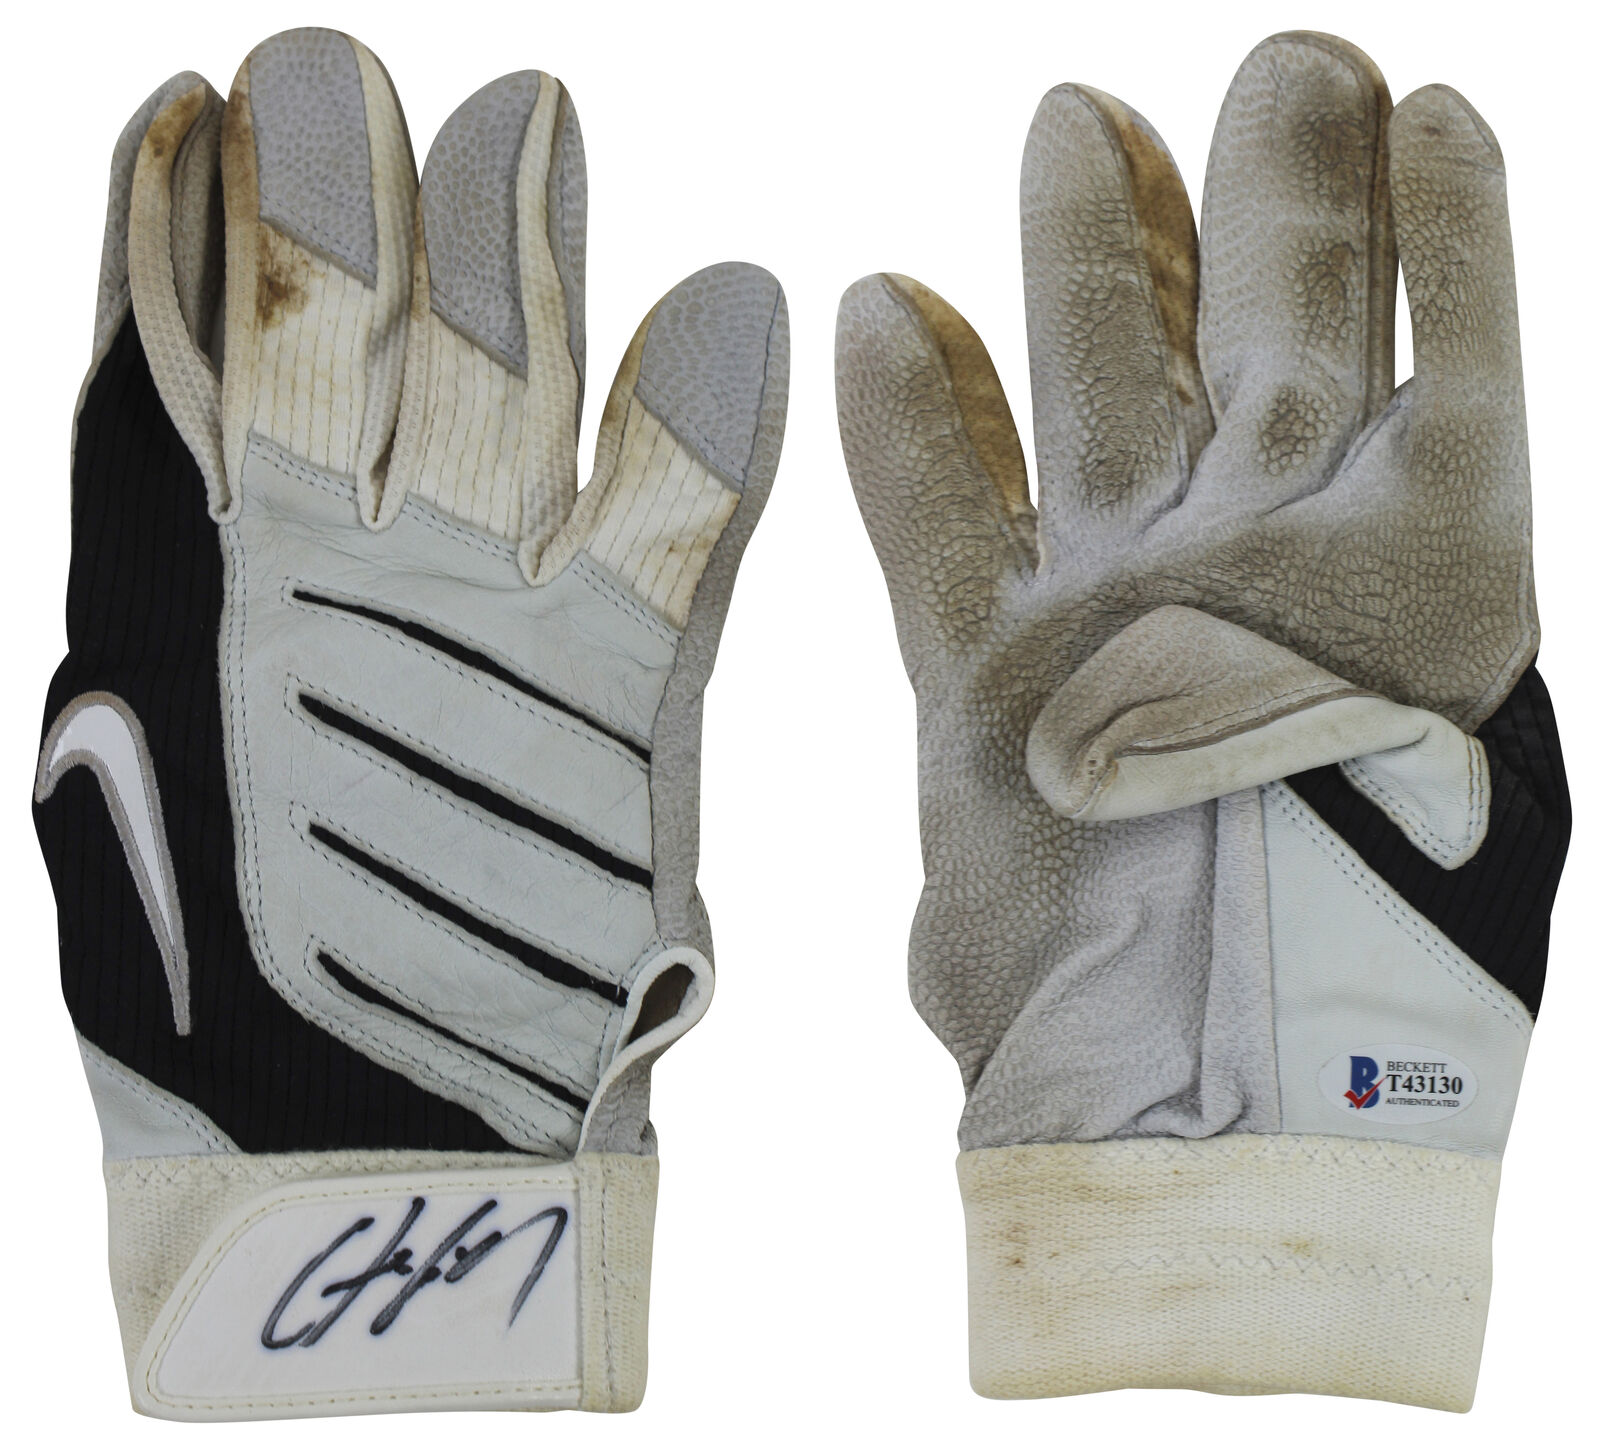 Yankees Chris Carter Authentic Signed Game Used Nike Batting Glove BAS #T43130